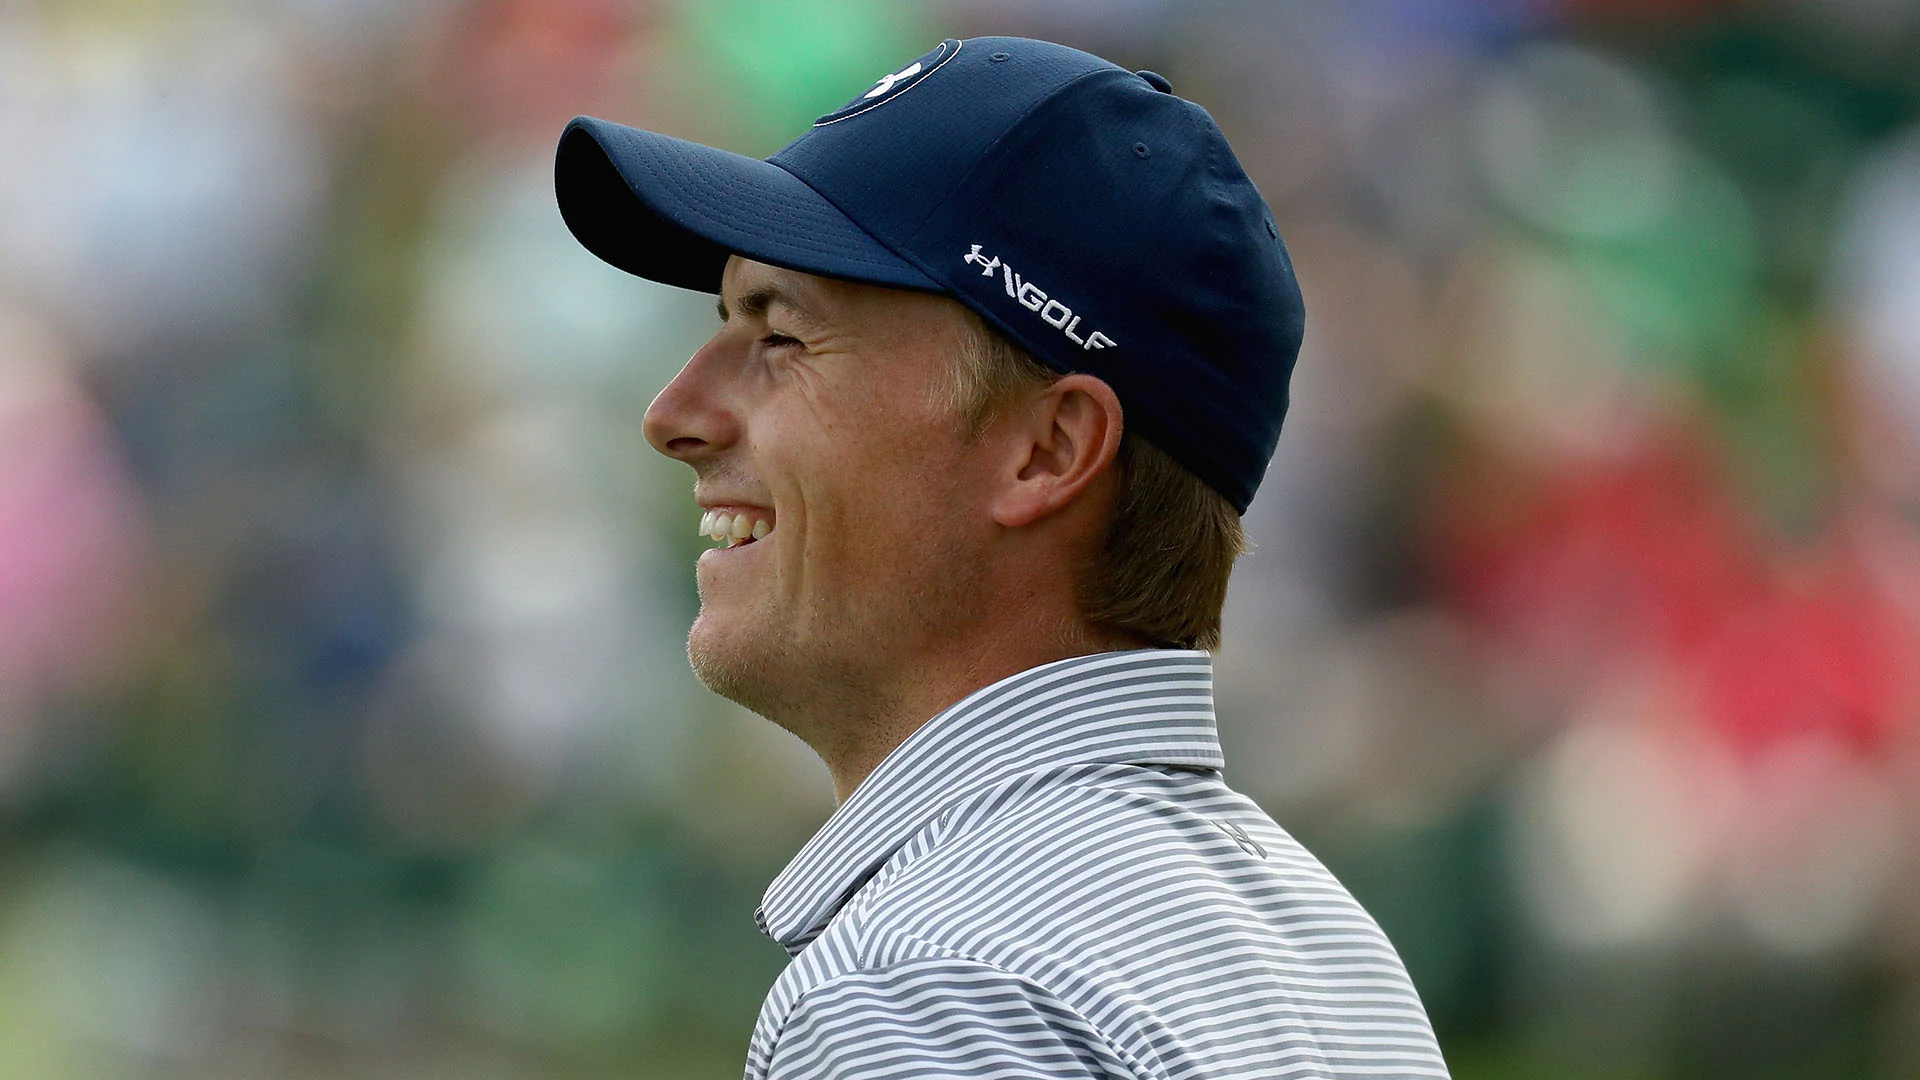 Jordan Spieth on ‘ace’ that hit spacer on fly at Dallas event: ‘I’m going to count it’